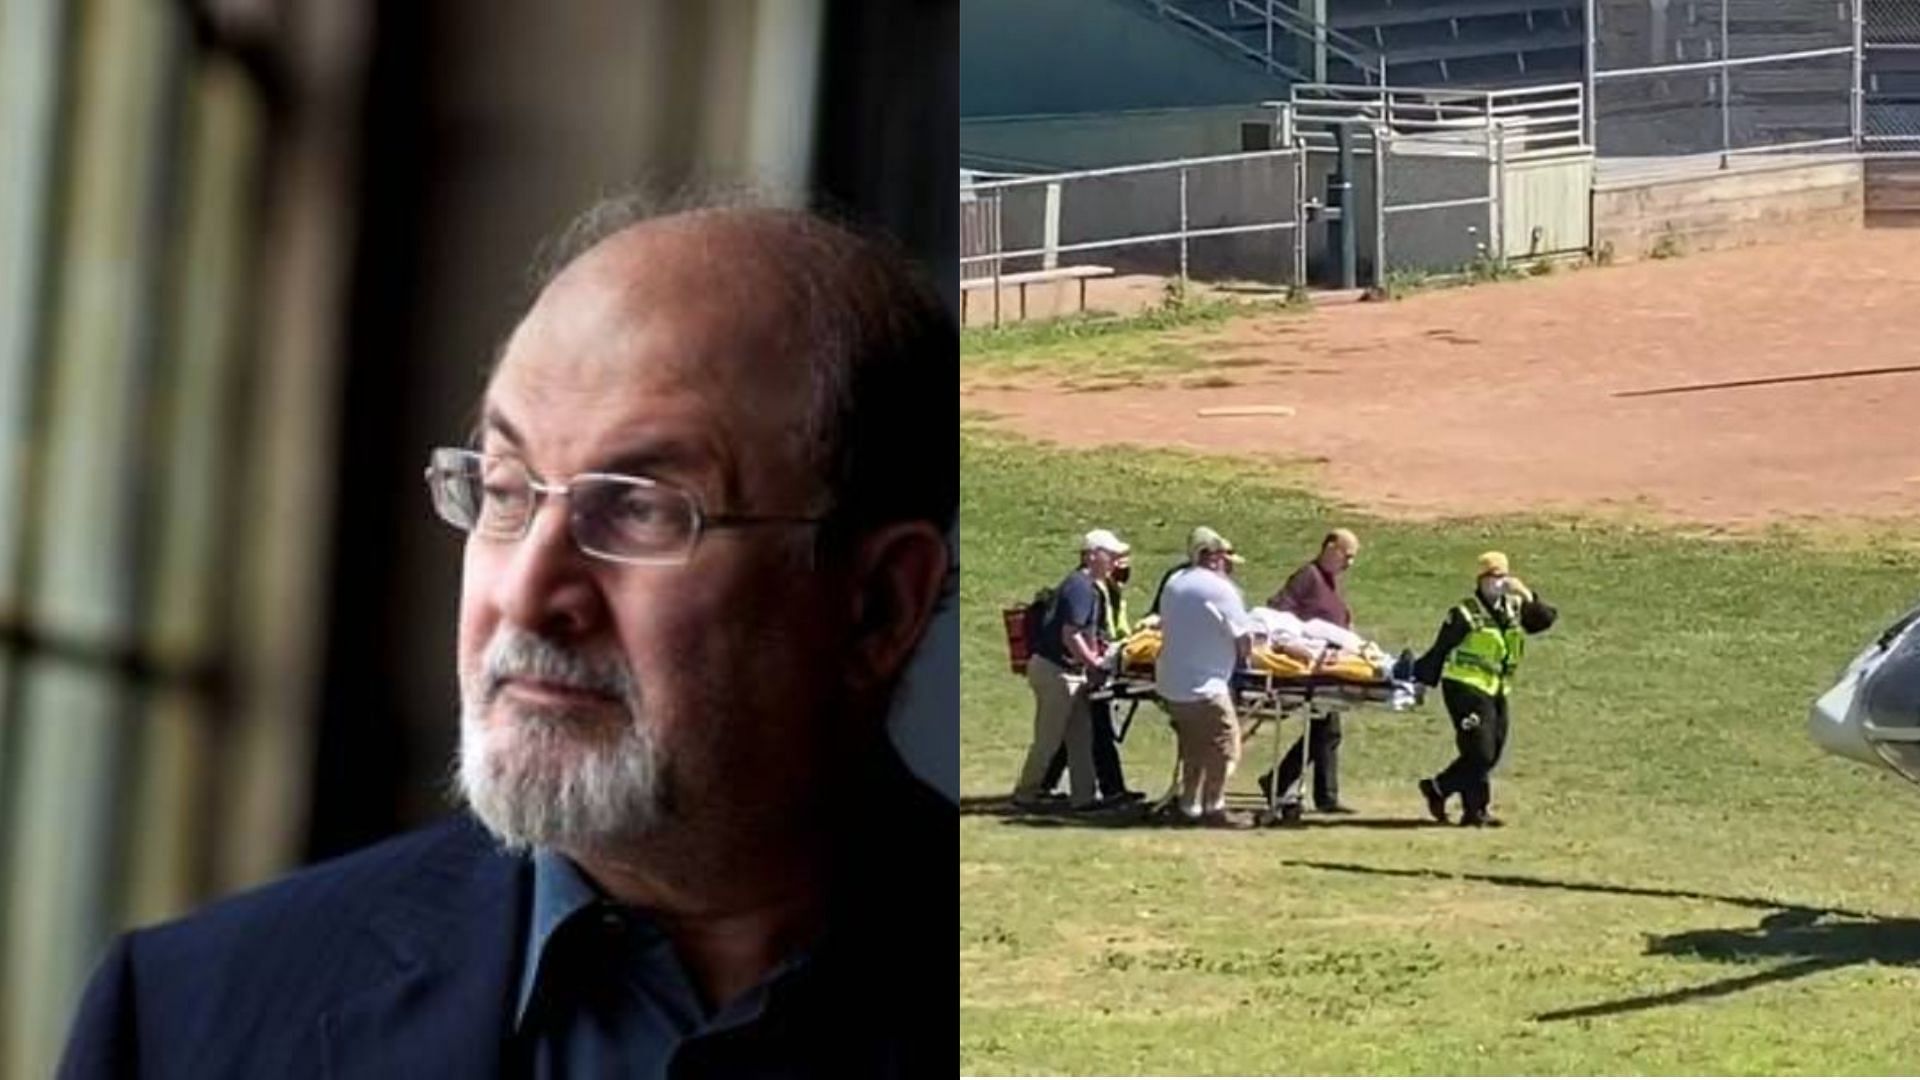 Celebrated writer Salman Rushdie was stabbed before he was scheduled to give a lecture in New York (Images via Twitter)